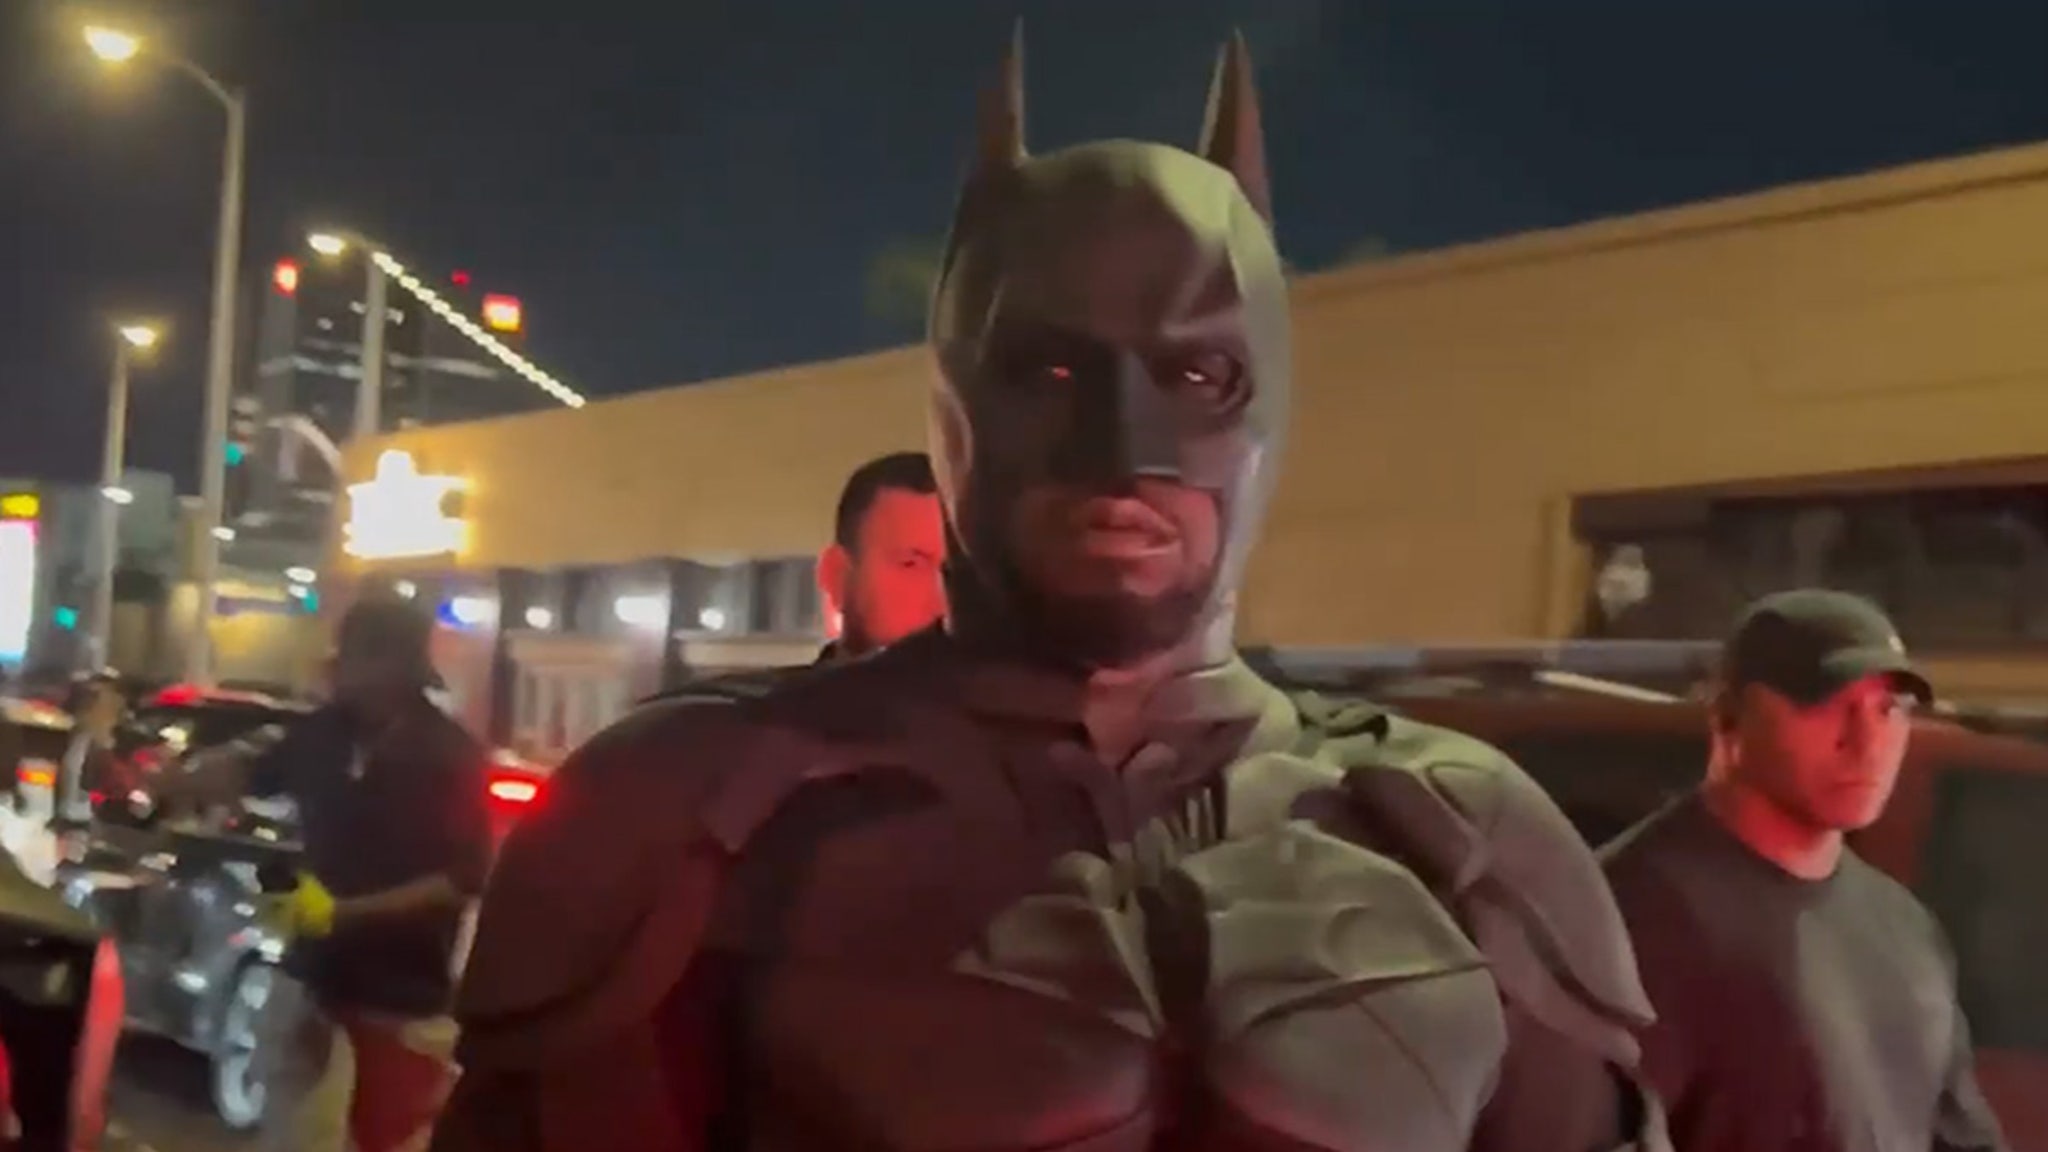 Diddy goes all out in his Batman costume, the Batmobile despite a ban from Warner Bros